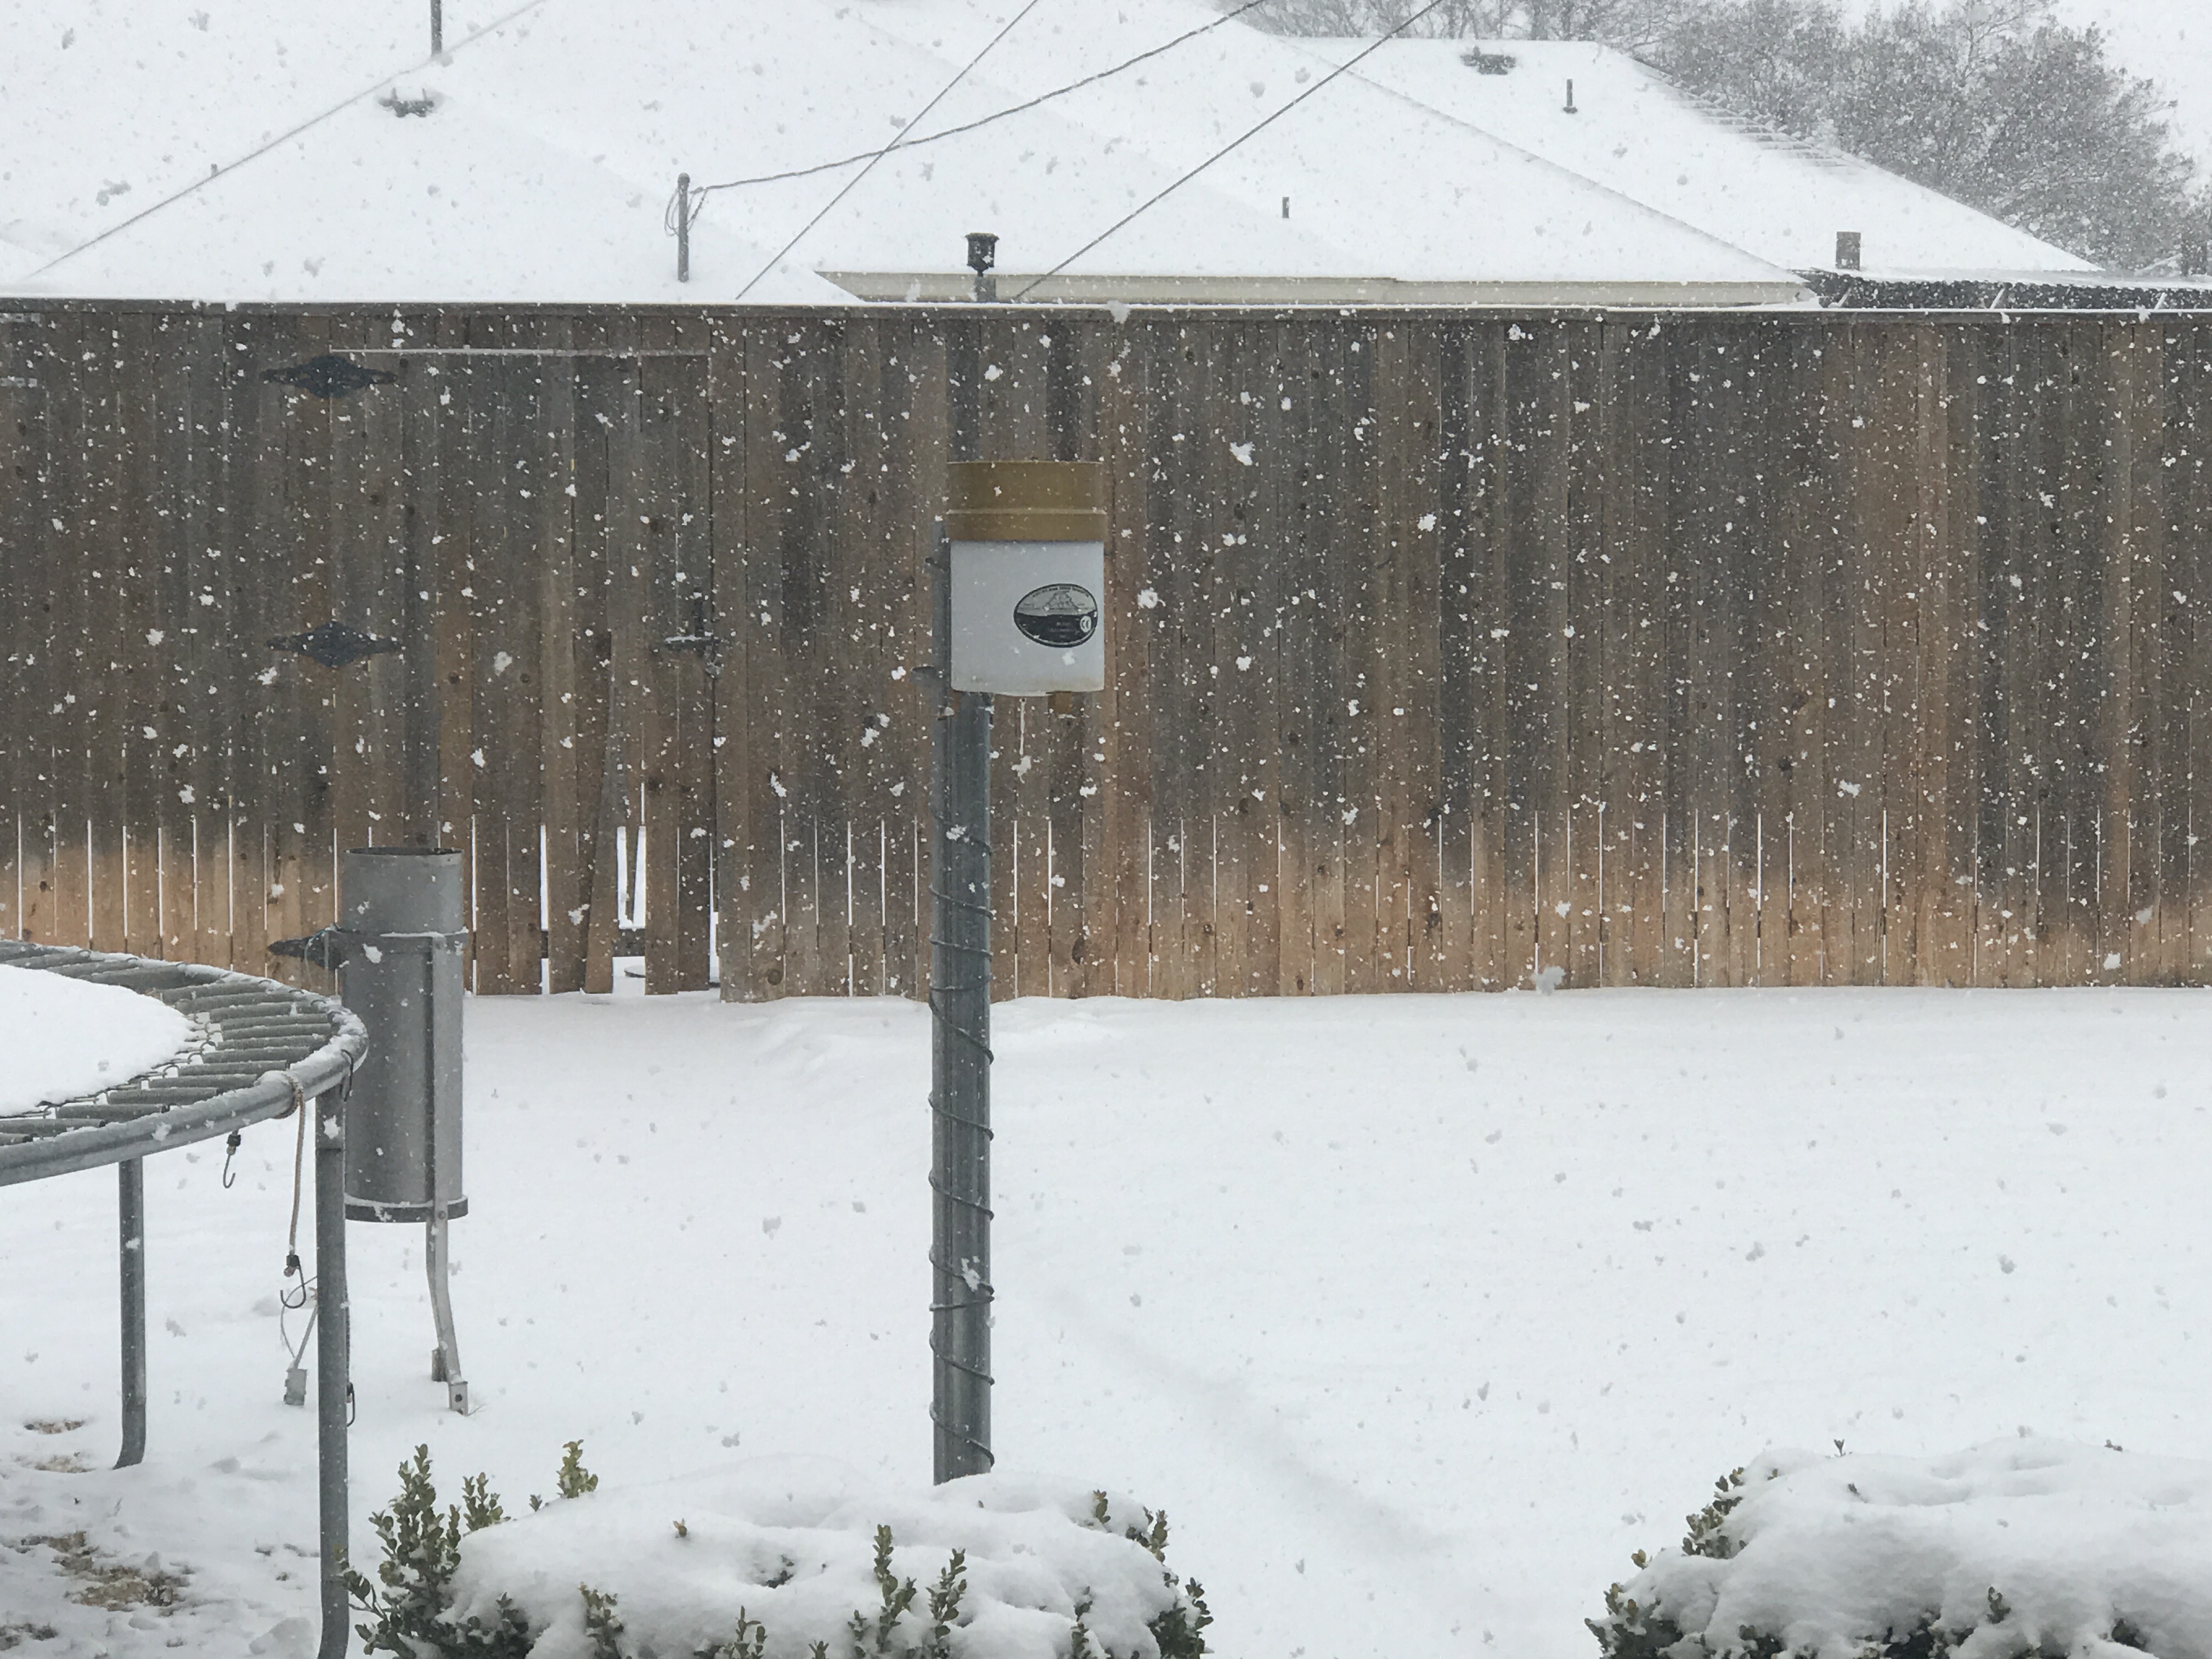 Snow falling in Shallowater early Tuesday afternoon (16 February 2021). The image is courtesy of Bruce Haynie.